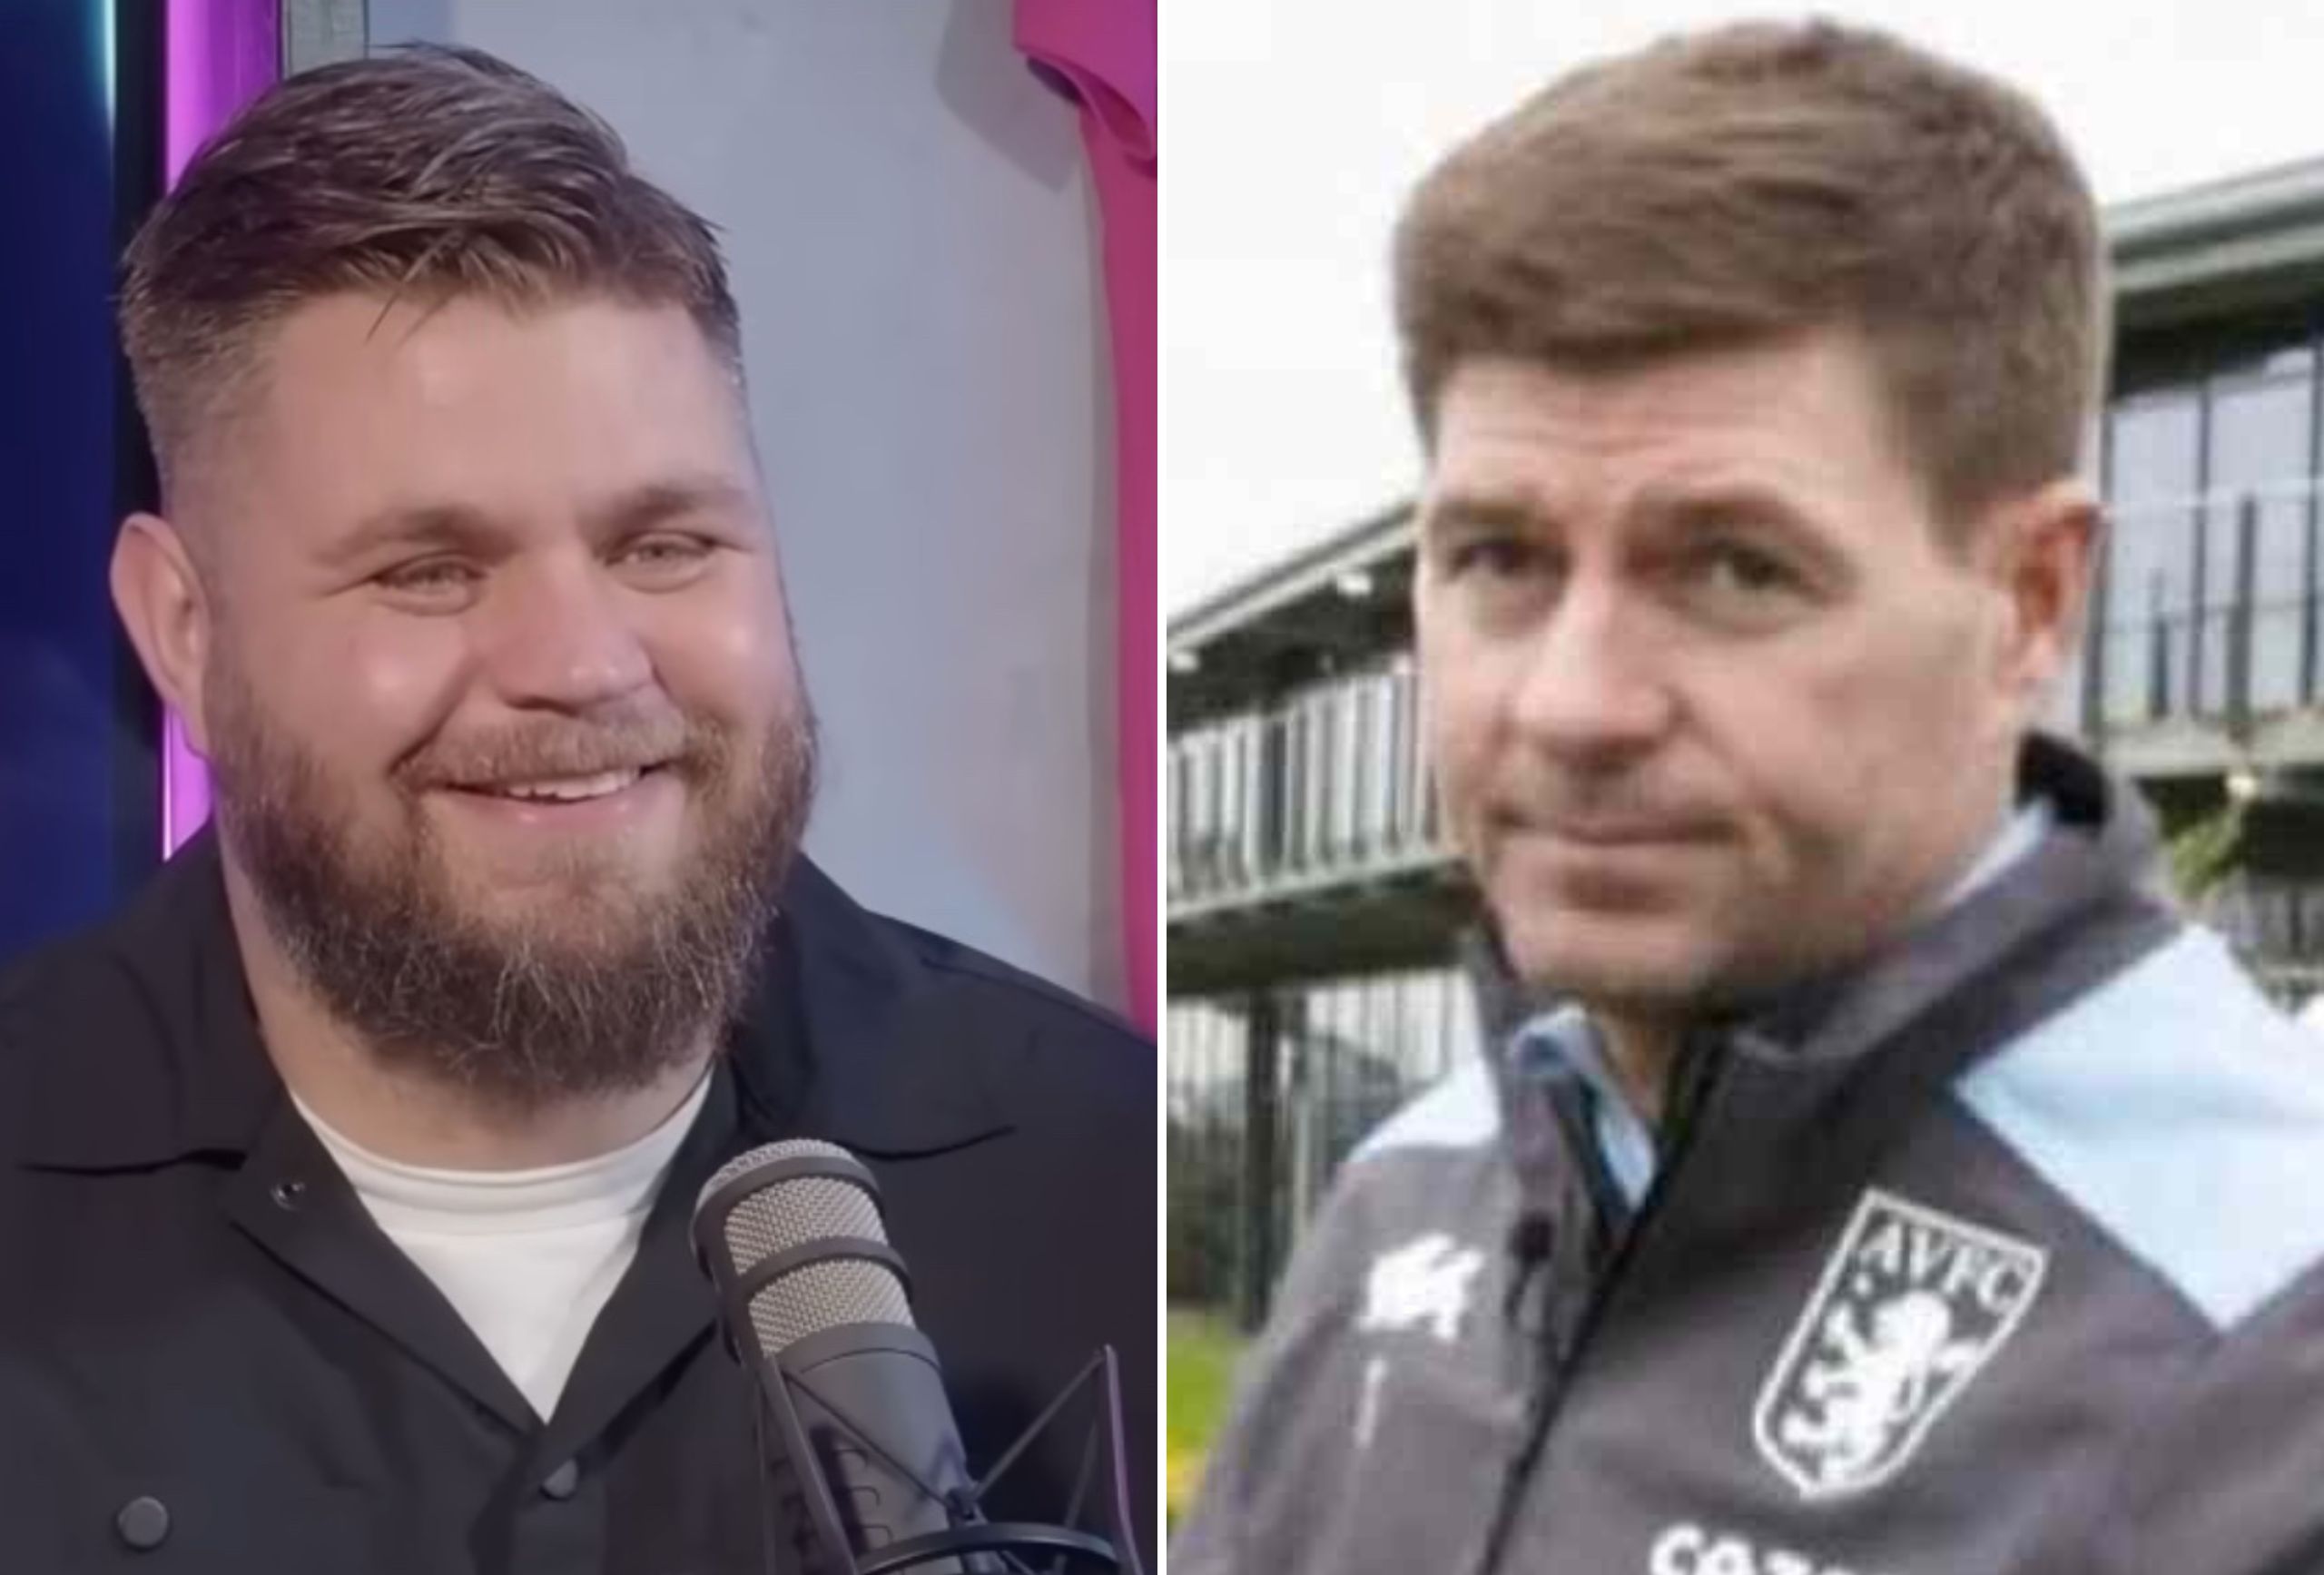 YouTuber Stephen Howson Lampooned Over Mislabeling Of Steven Gerrard: ‘Guy Chats So Much Crap’